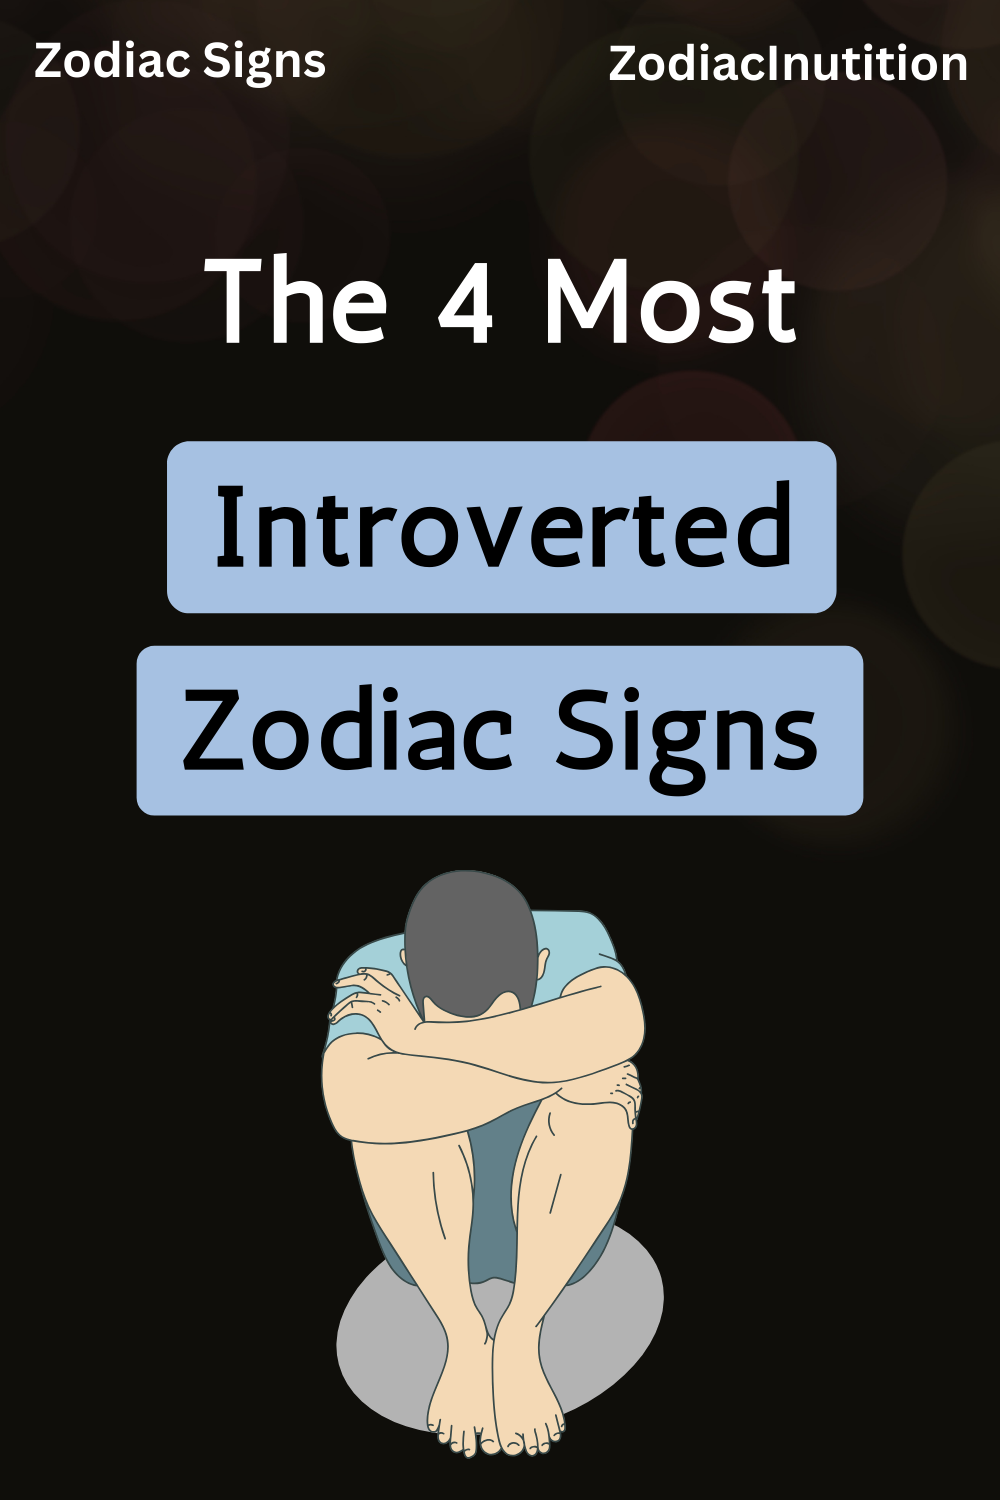 The 4 Most Introverted Zodiac Signs